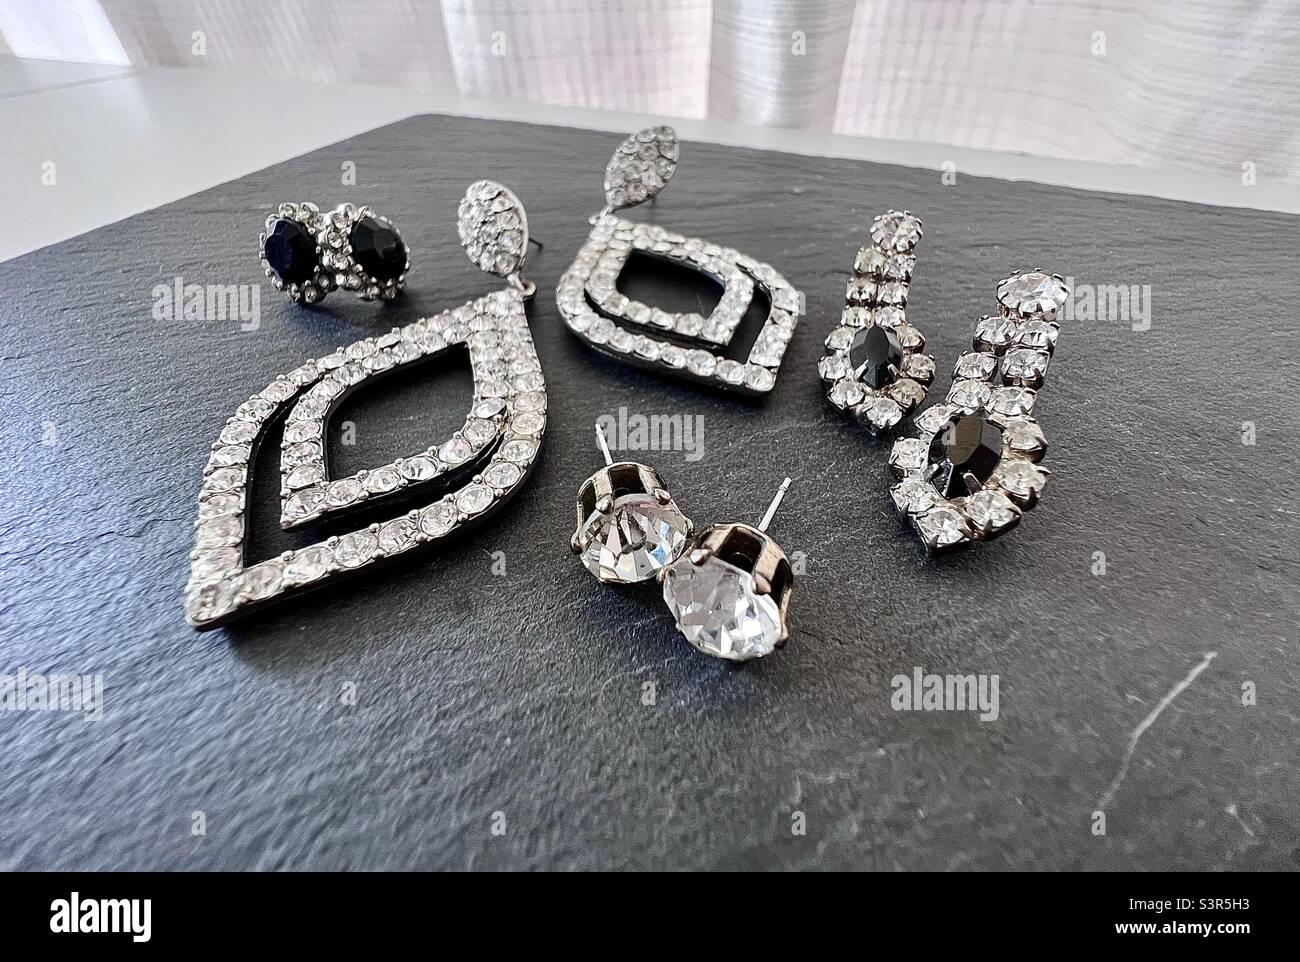 Still life photography display of vintage costume jewelry, earrings, clear  rhinestone and black gem on gray slate with white background Stock Photo -  Alamy